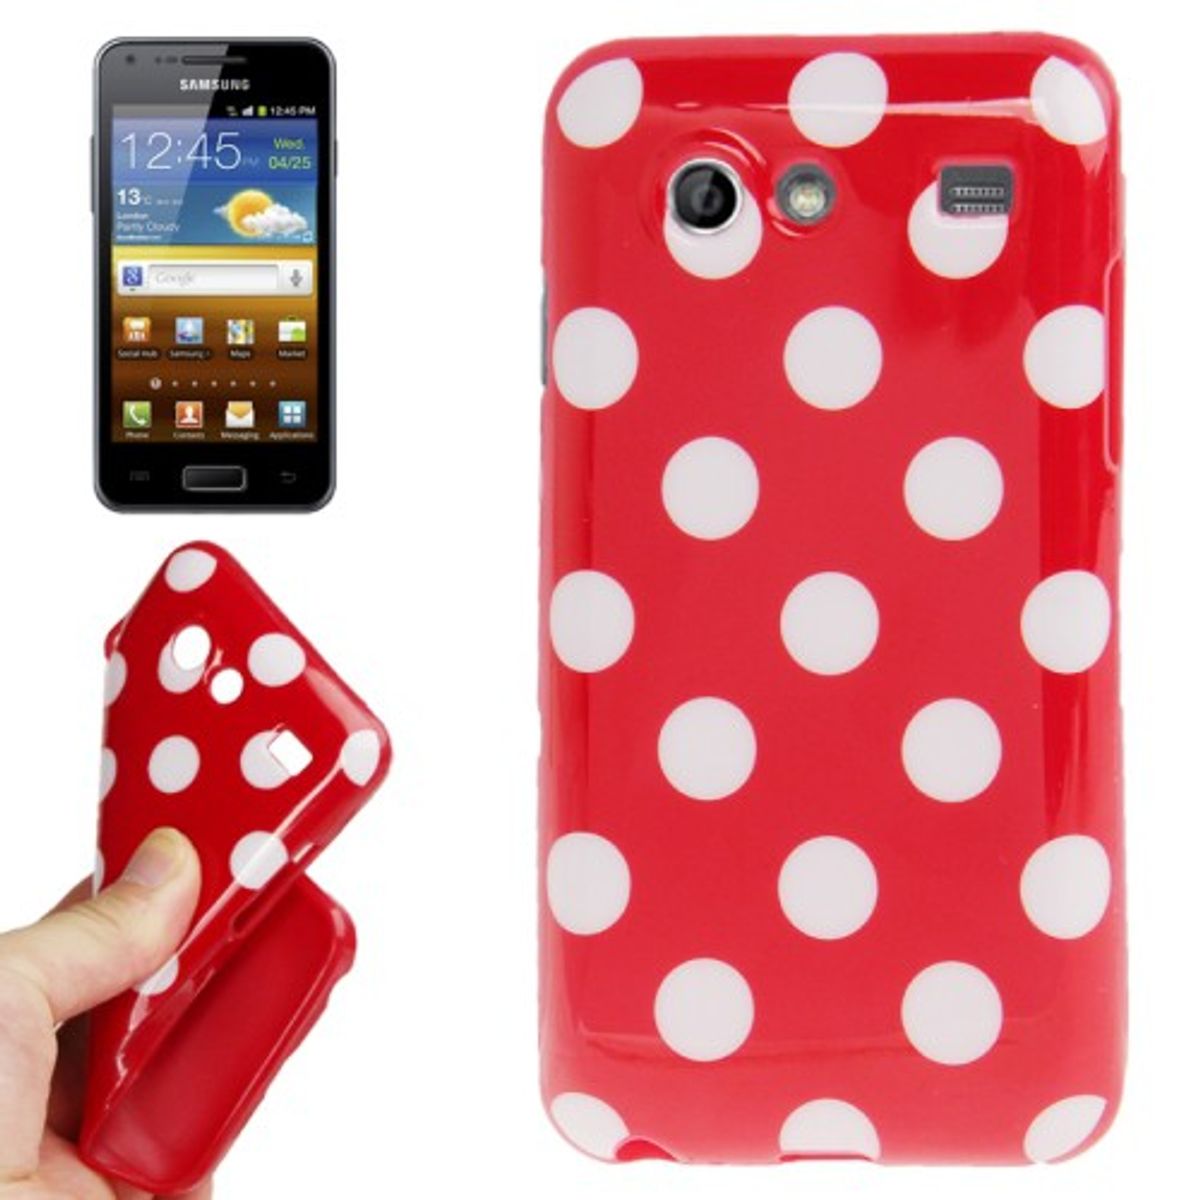 Protective case for mobile phone Samsung Galaxy S Advance i9070 red